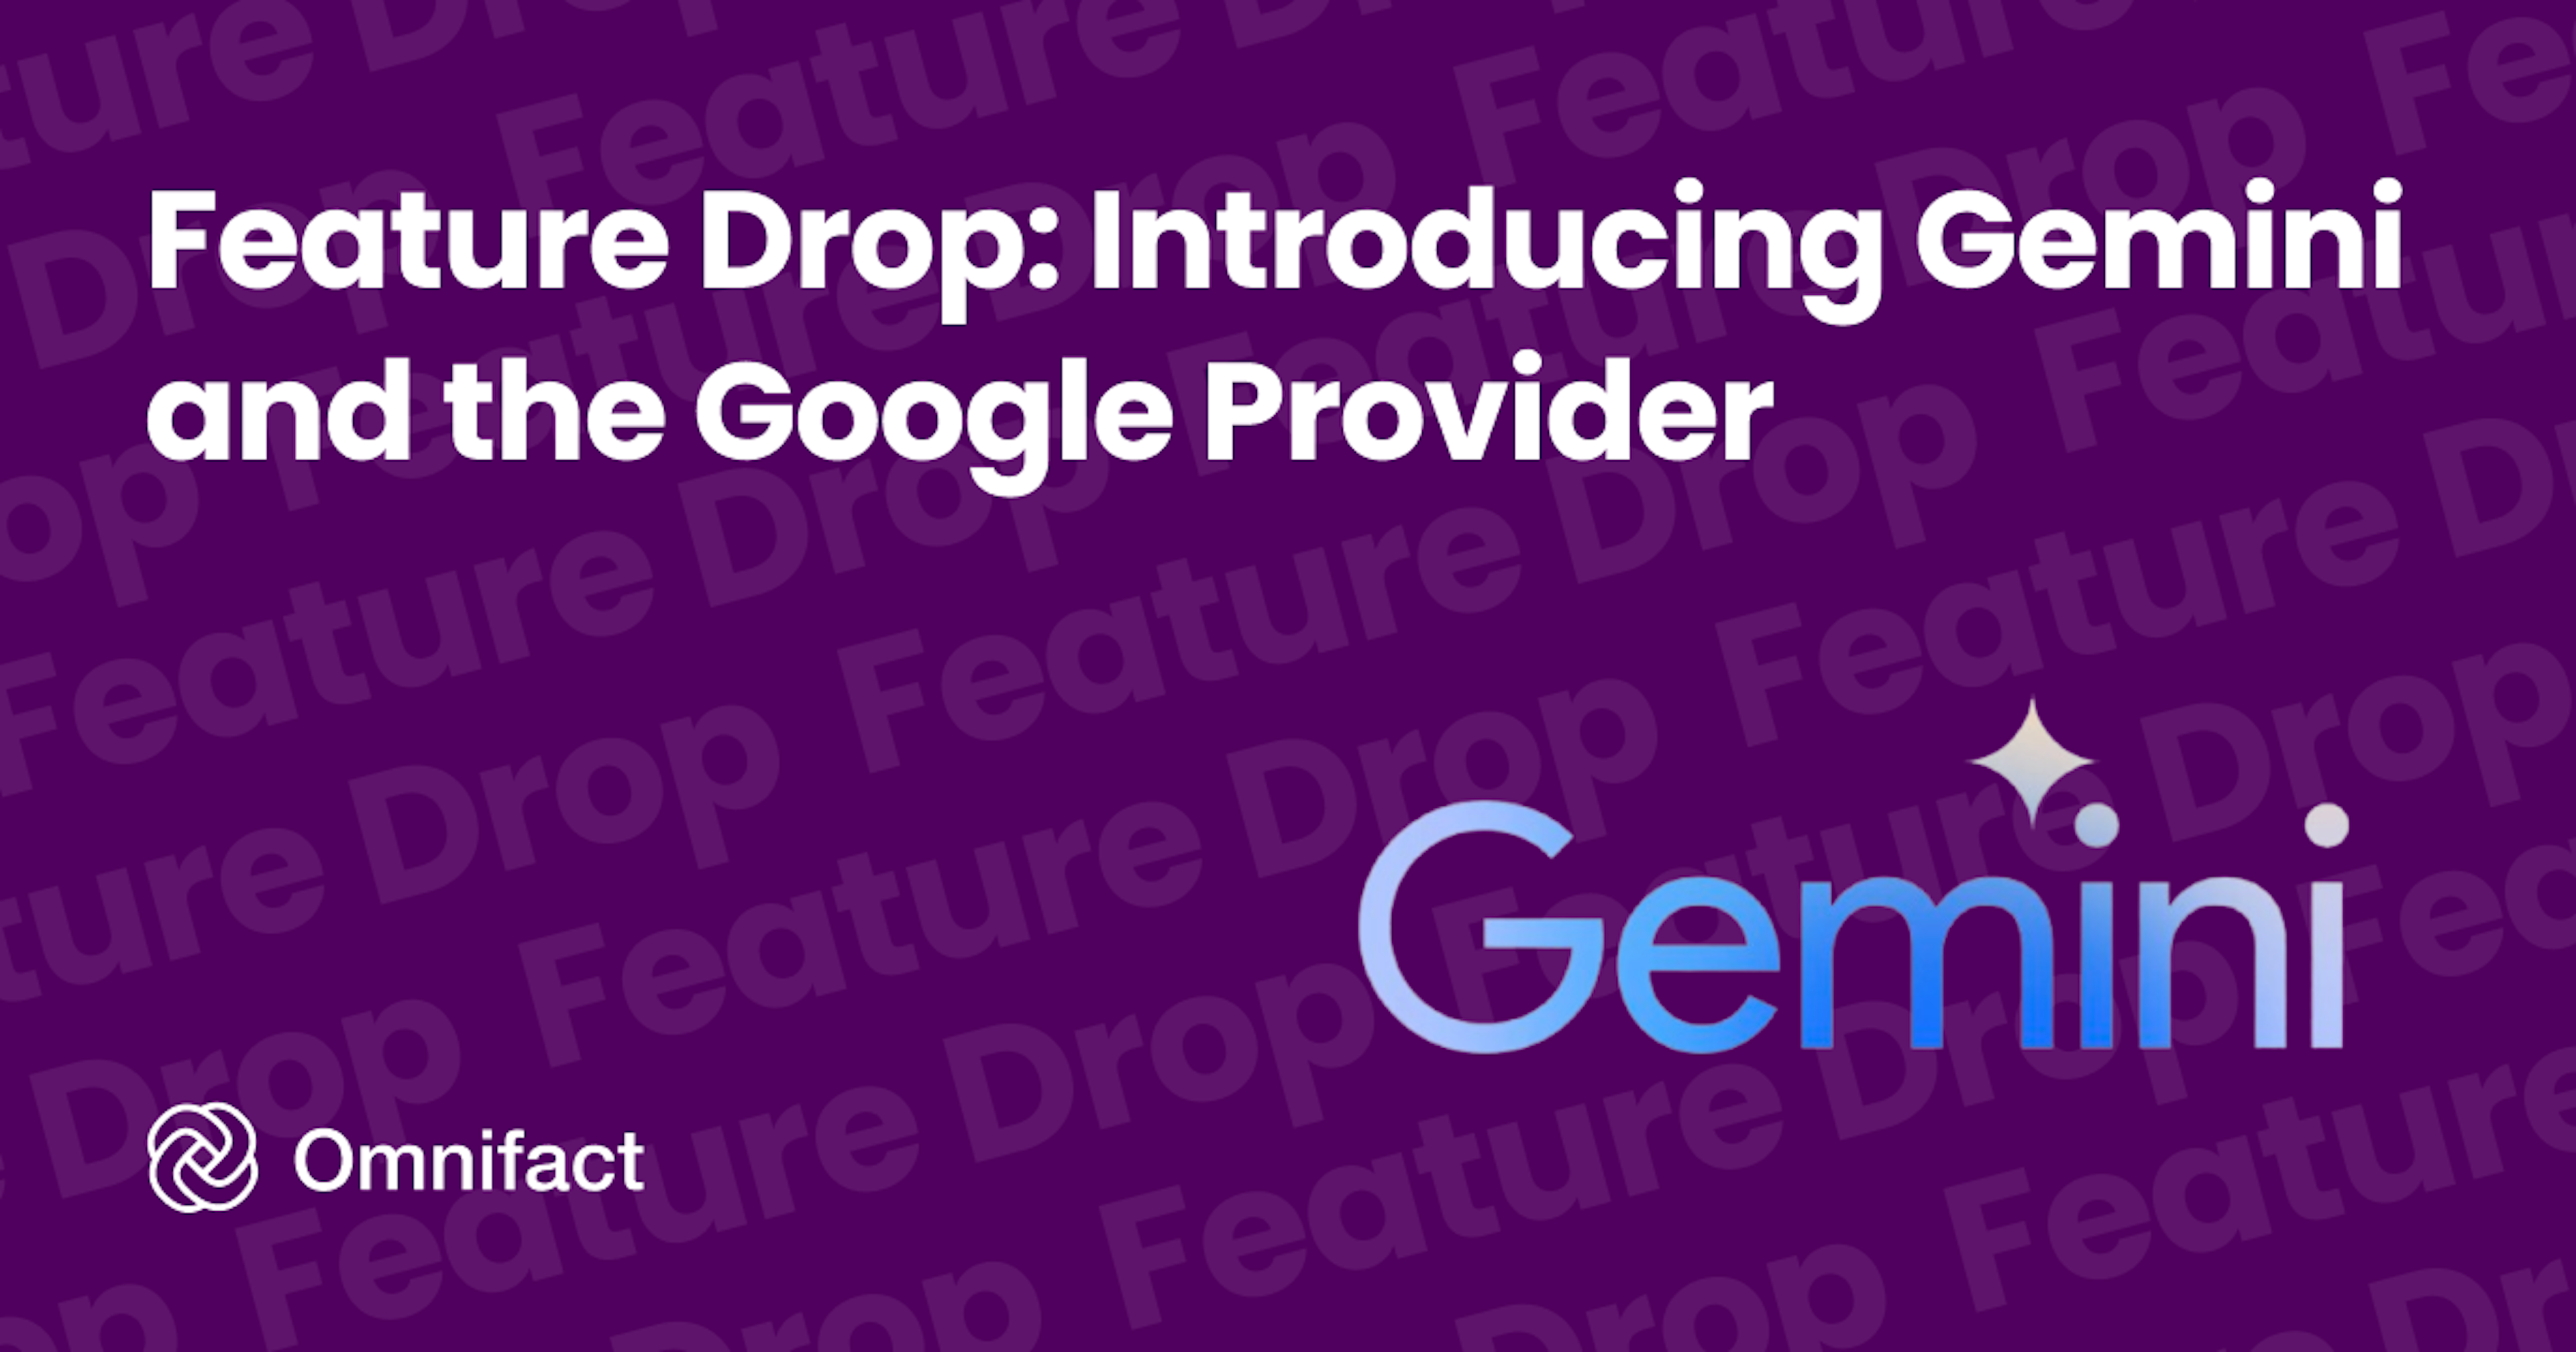 Empower your work with Google Gemini 1.0 Pro, now available on Omnifact.